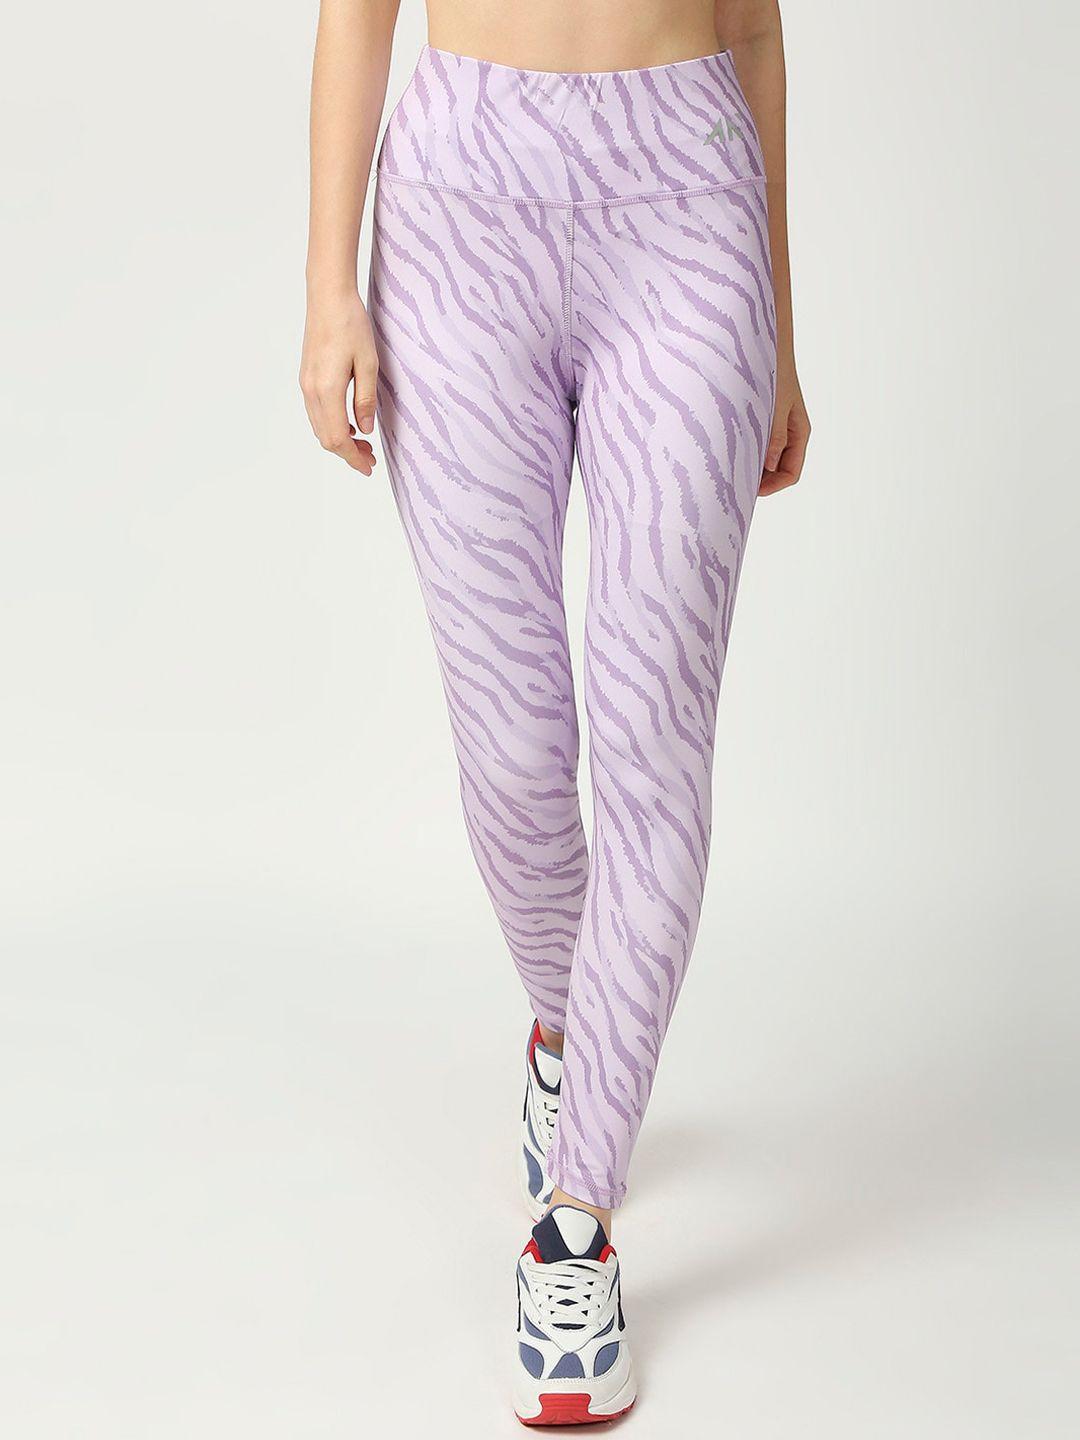 aesthetic nation women lavender printed dry fit tights